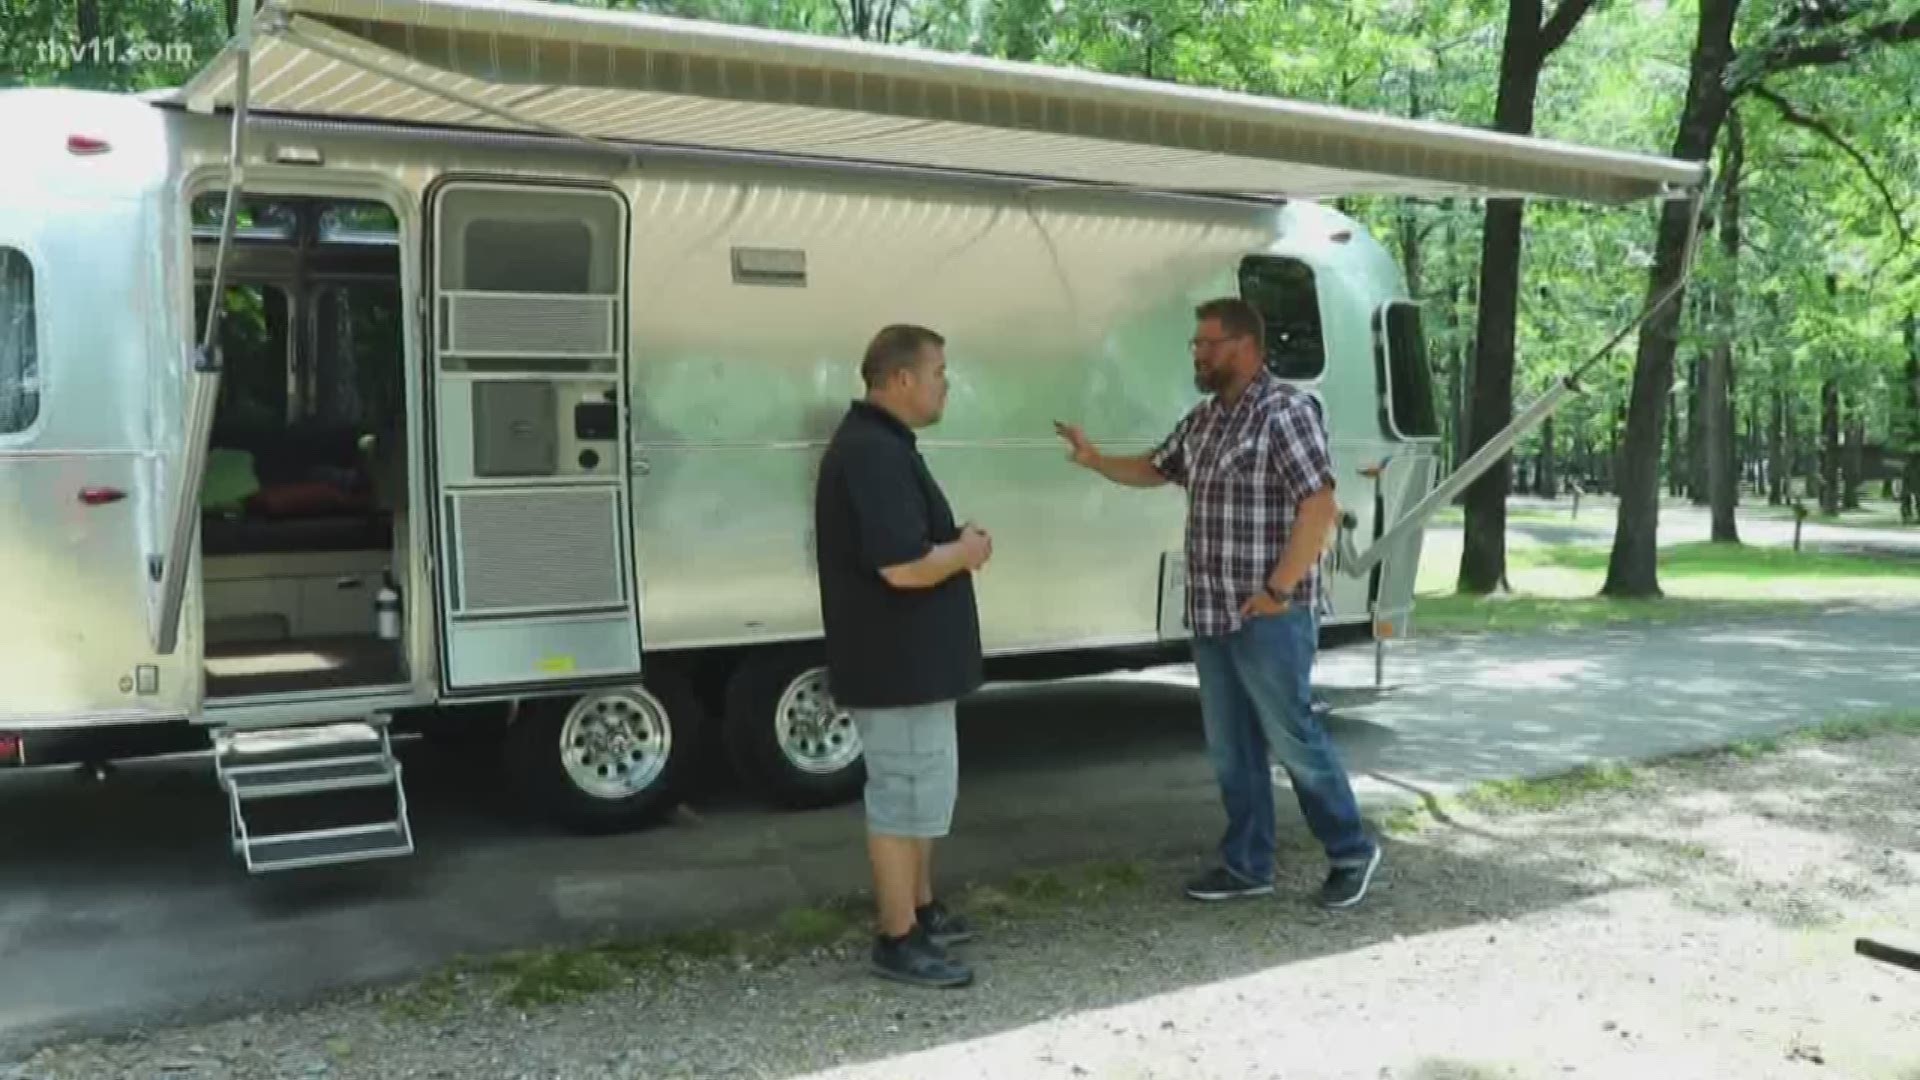 iDrive Crain RV Edition airs every Thursday at 9 a.m. throughout the month of July.